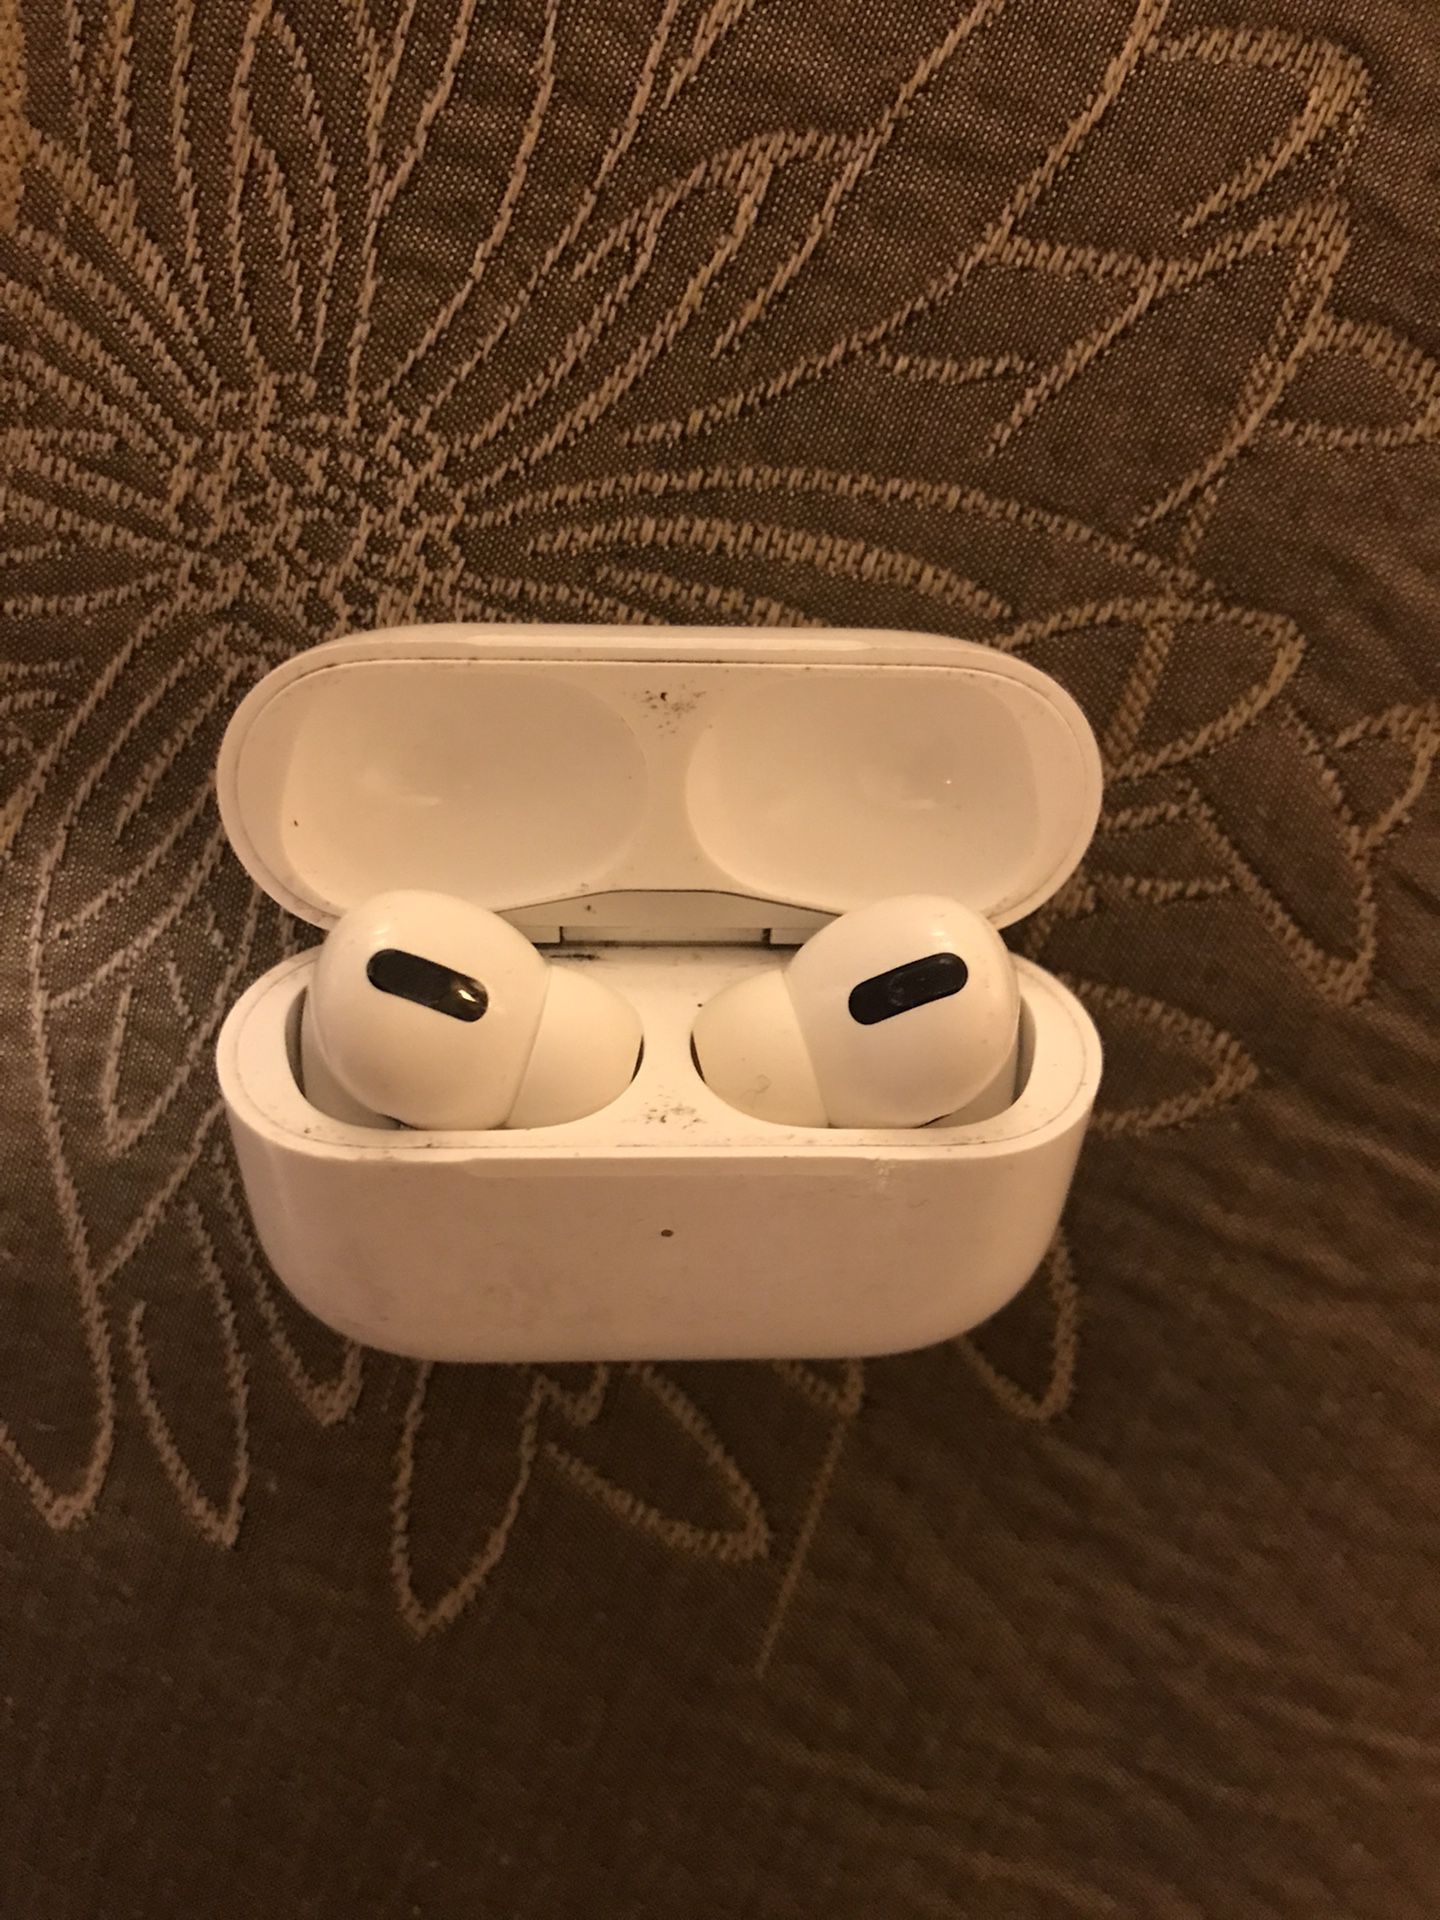 7th Generation Air Pods